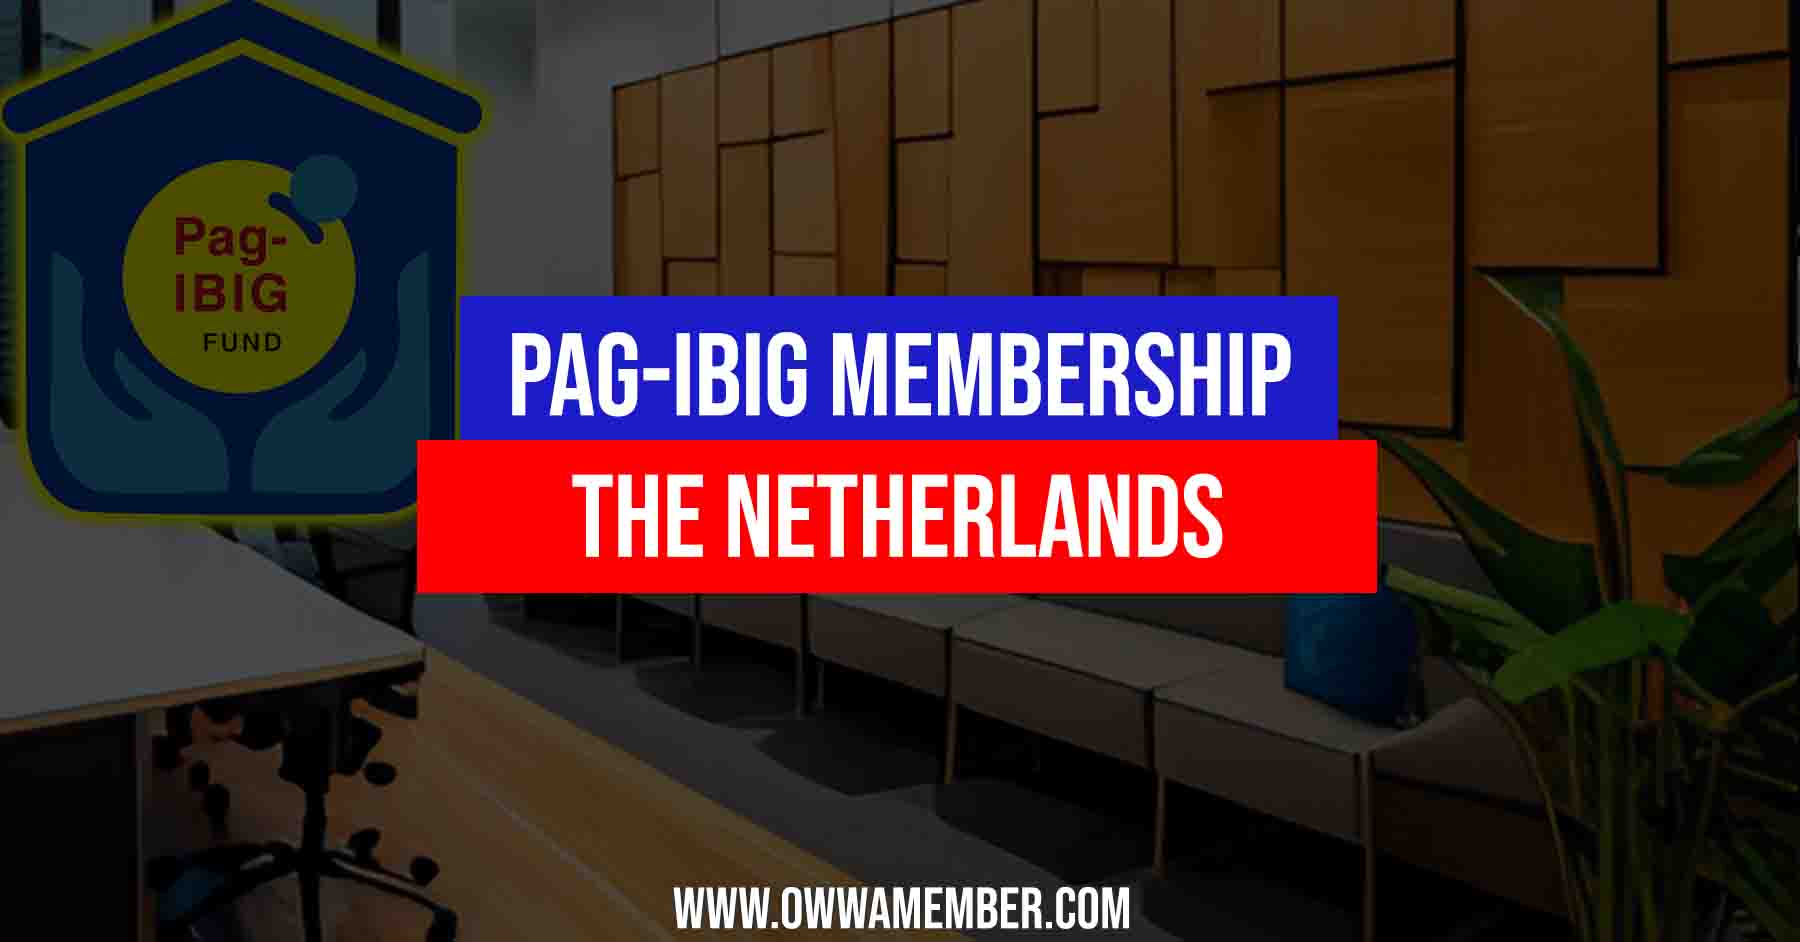 apply pag-ibig membership in netherlands for ofw